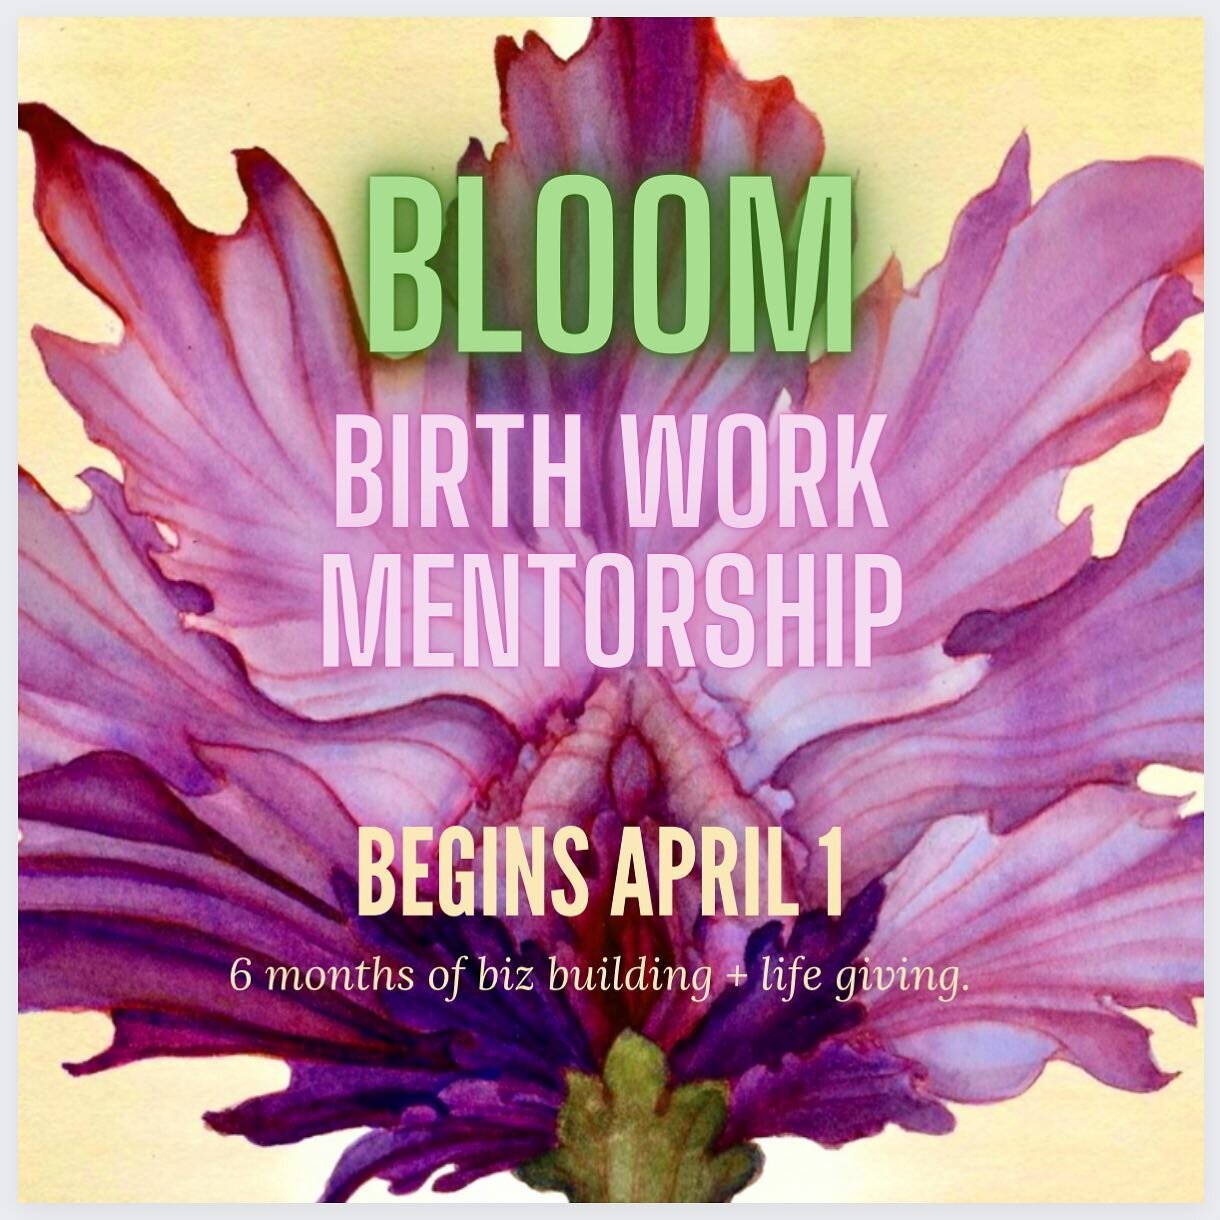 🌸 Happy Springtime! 🌸

Omg what a relief!&nbsp;I'm feeling the call, as we come out of hibernation, to allow my&nbsp;desire to hold space for a birthwork mentorship to BLOOM. I'm envisioning a&nbsp;small group where we can support + uplift each oth